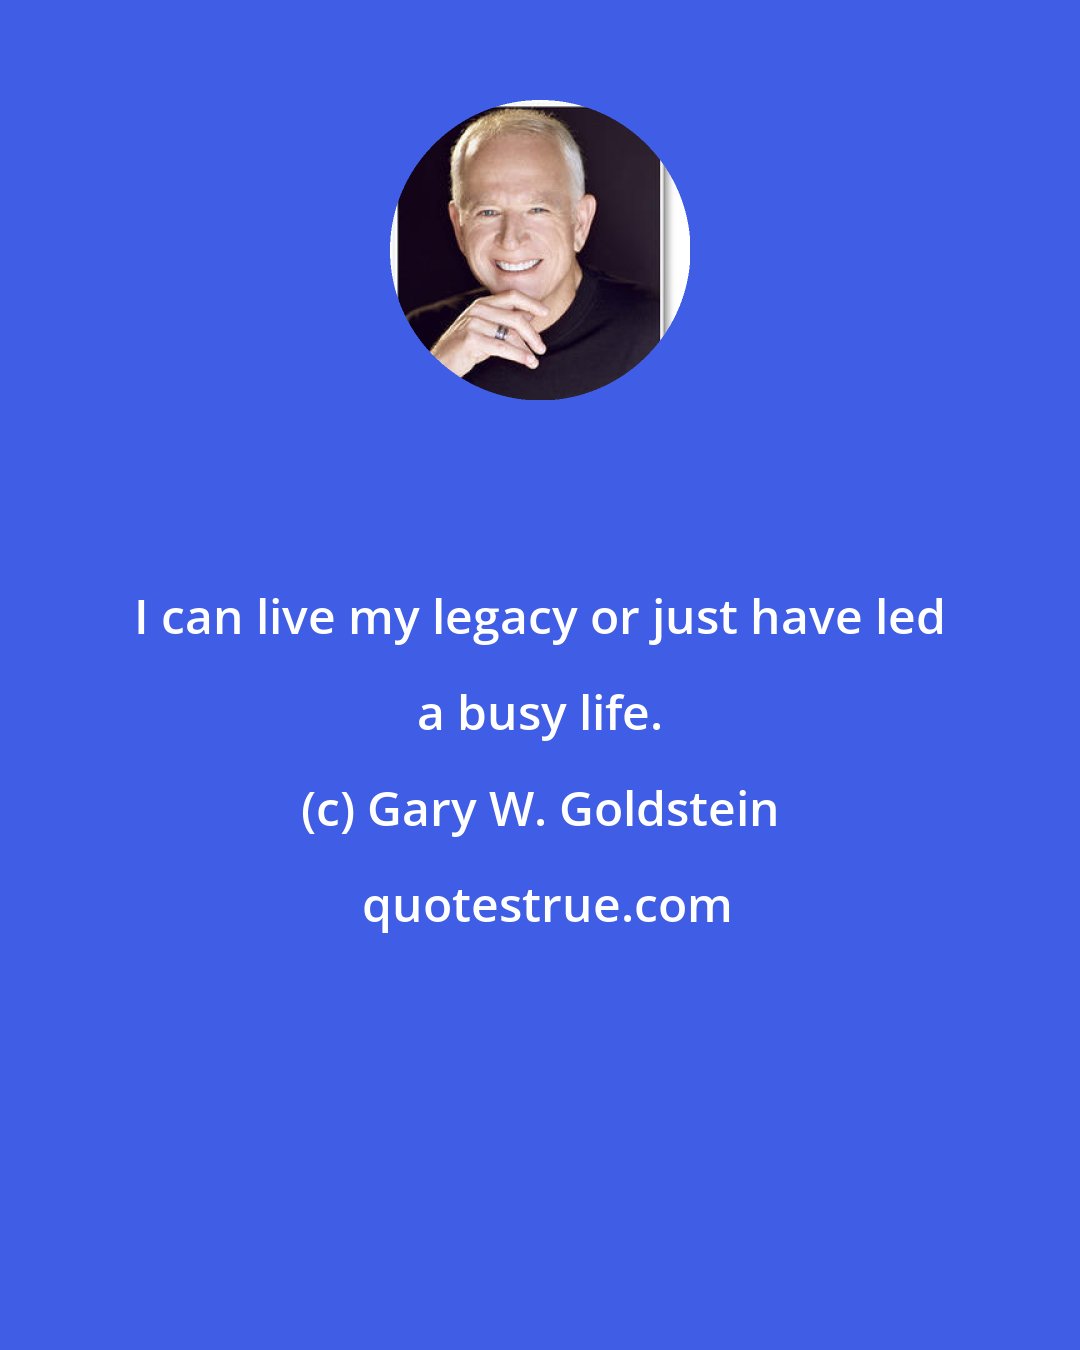 Gary W. Goldstein: I can live my legacy or just have led a busy life.